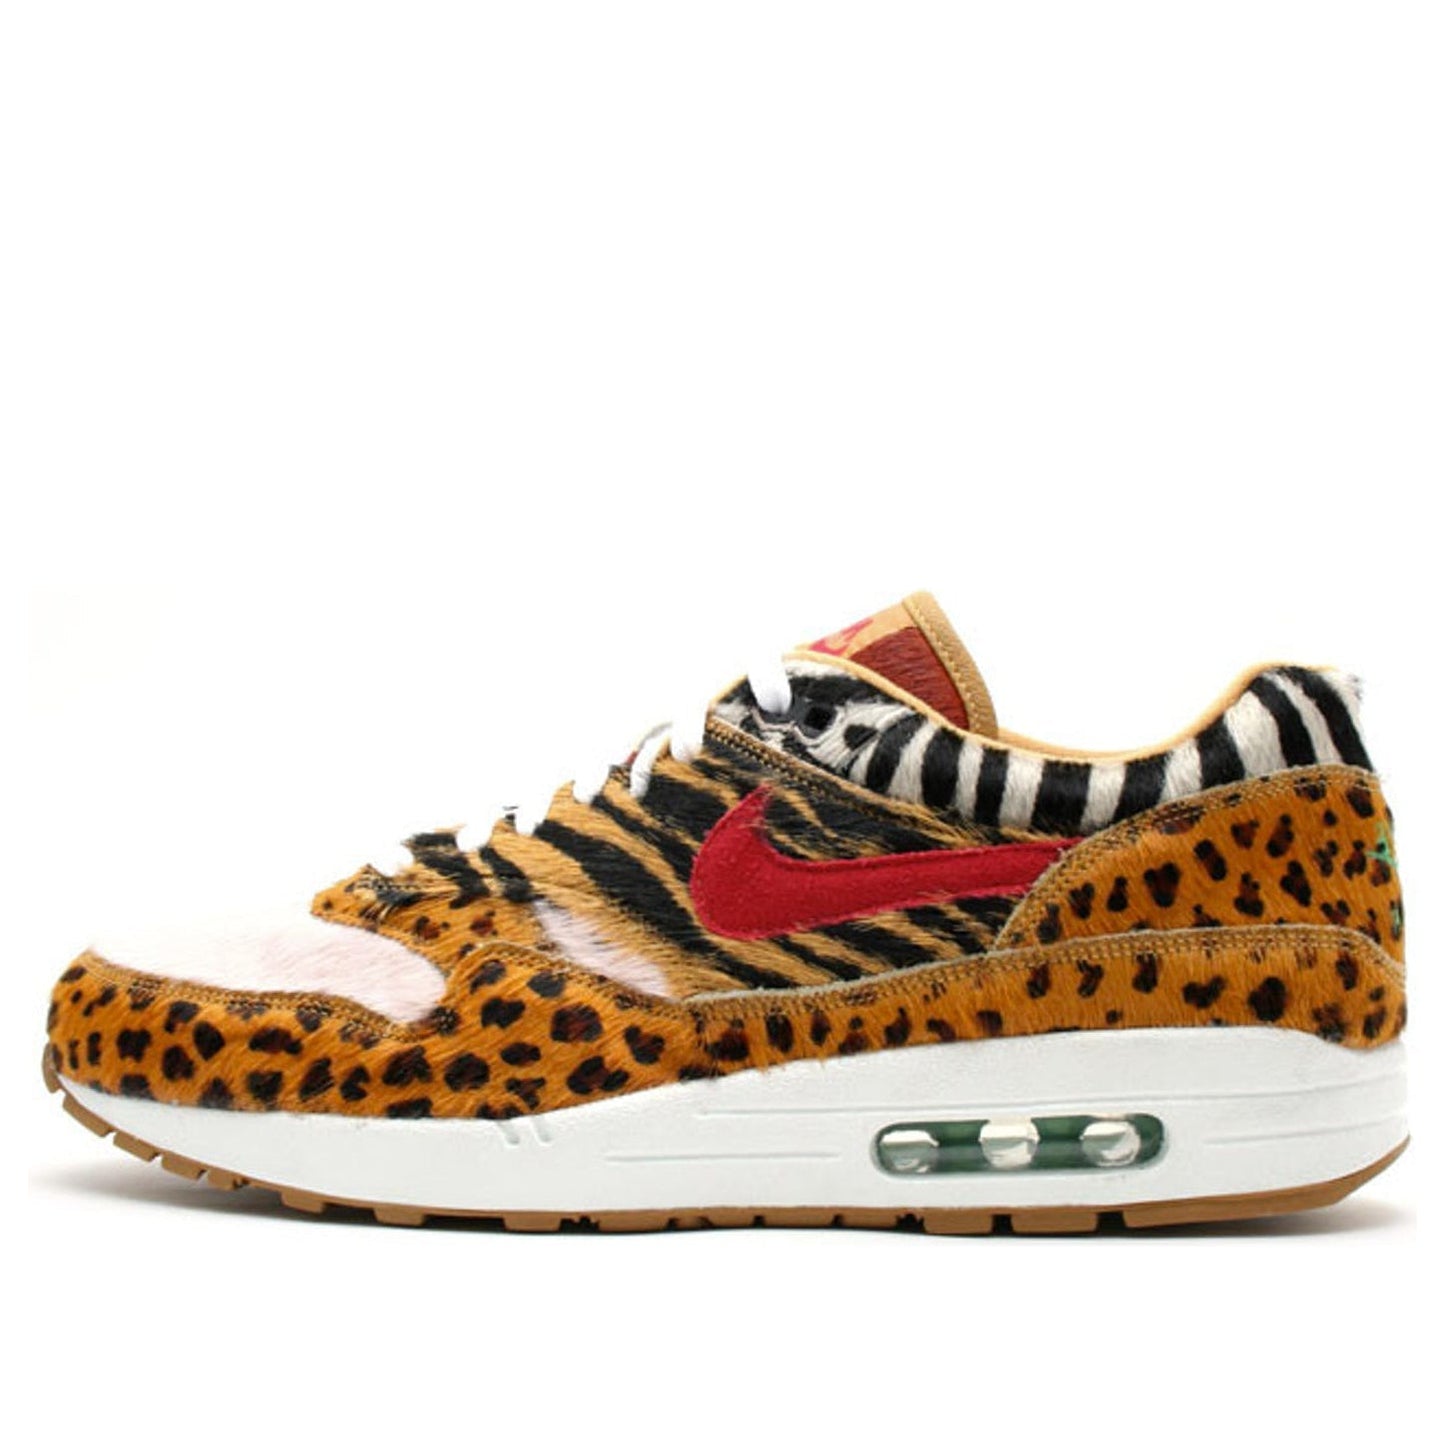 Nike Atmos x Air Max 1 Supreme 'Animal Pack' Wheat/Sport Red/Bison/Classic Green 315763-761 KICKSOVER